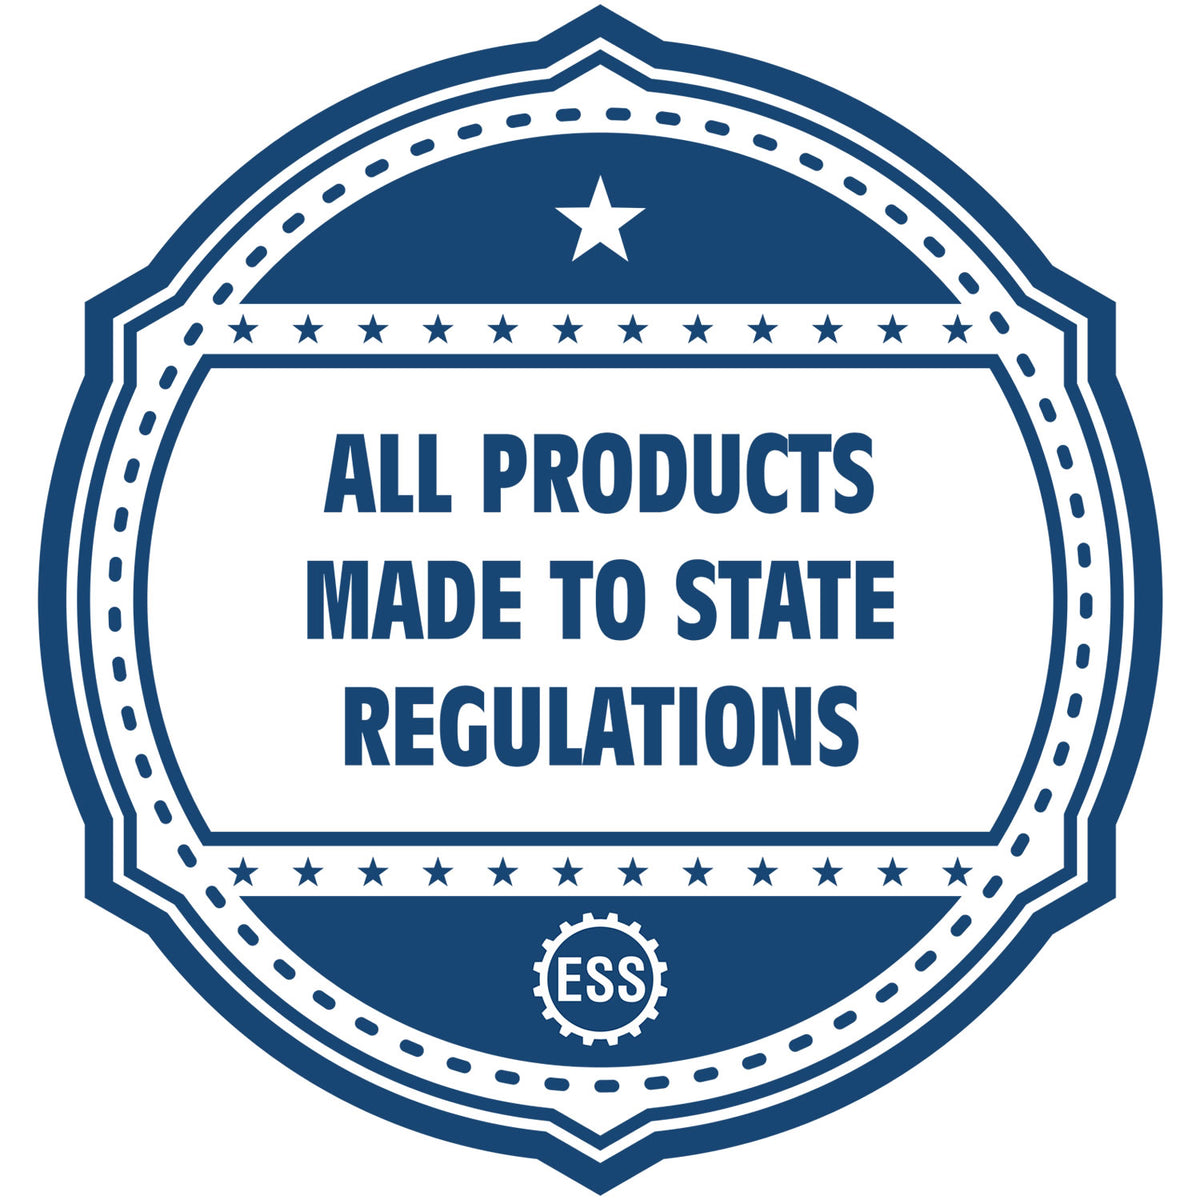 An icon or badge element for the Extended Long Reach Kentucky Architect Seal Embosser showing that this product is made in compliance with state regulations.